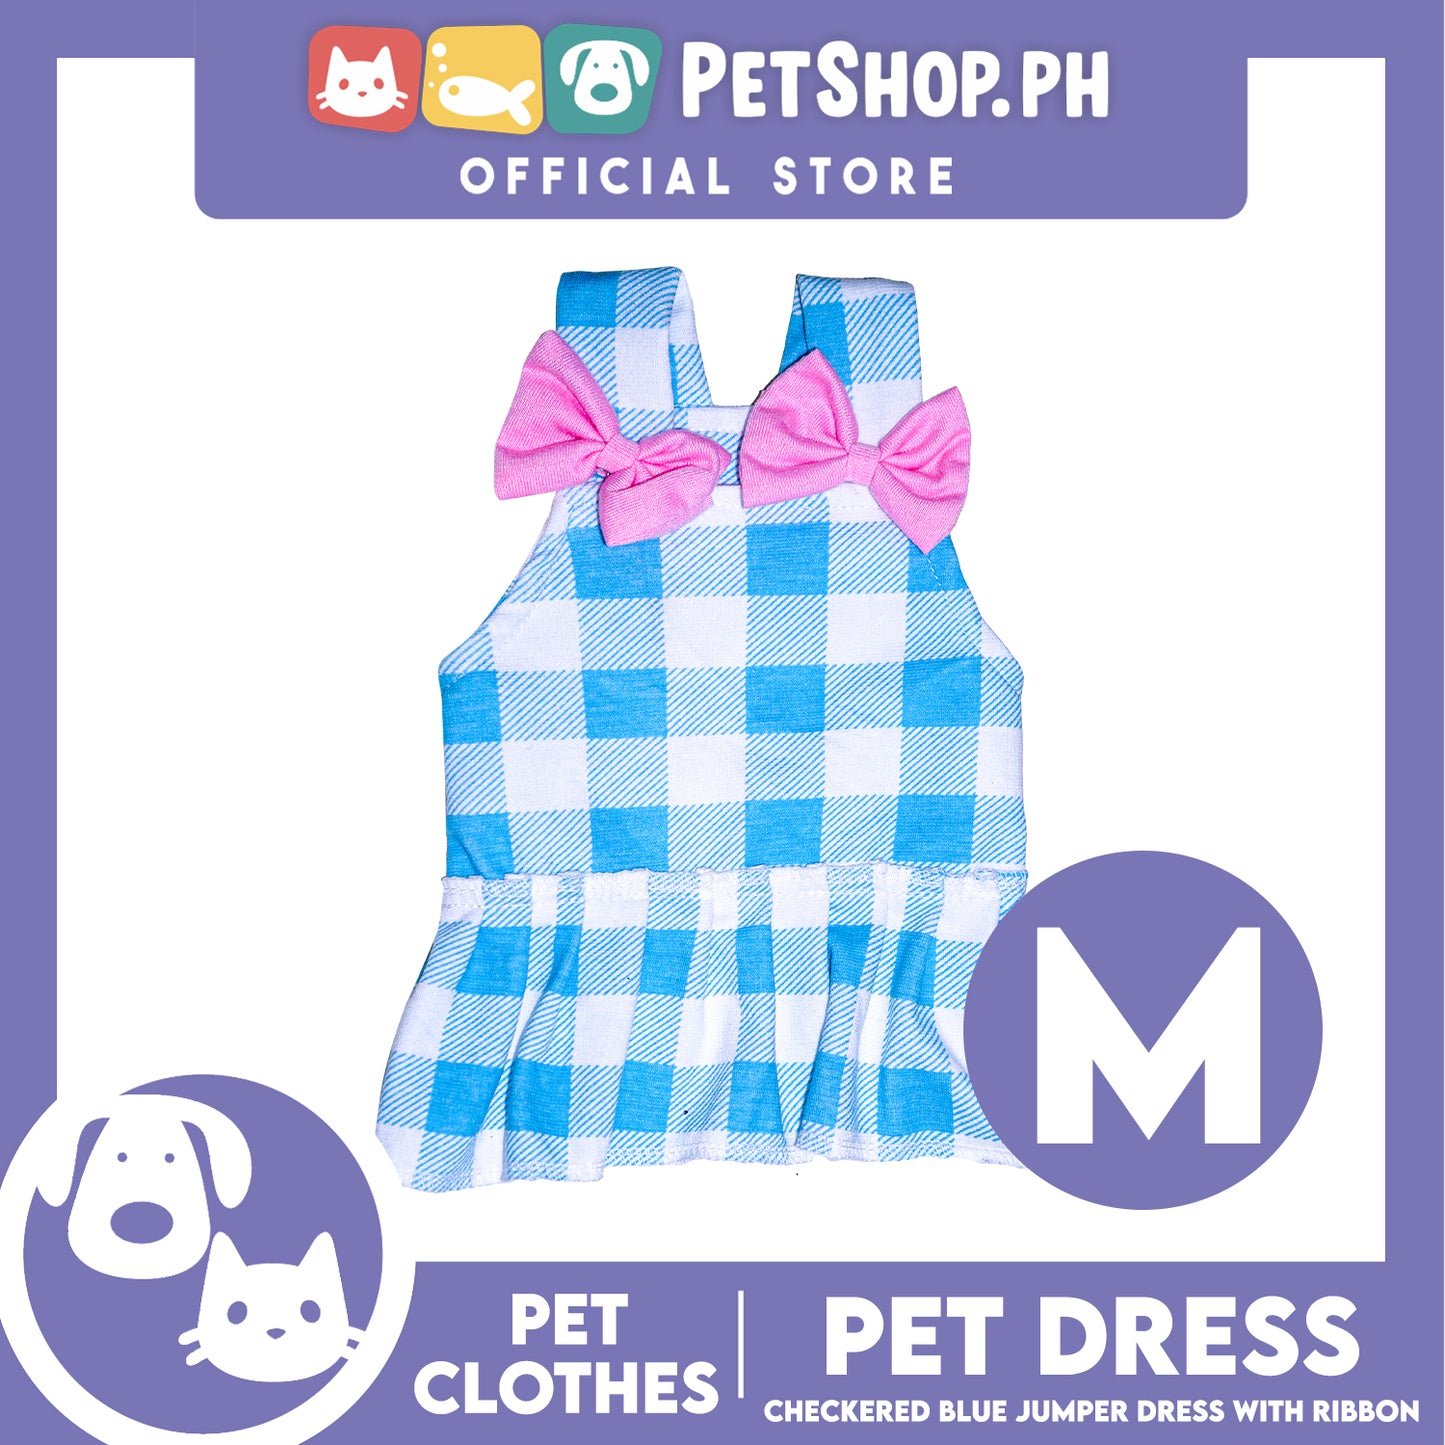 Pet Dress Checkered Blue Dress with pink ribbon (Medium) Perfect Fit for Dogs and Cats